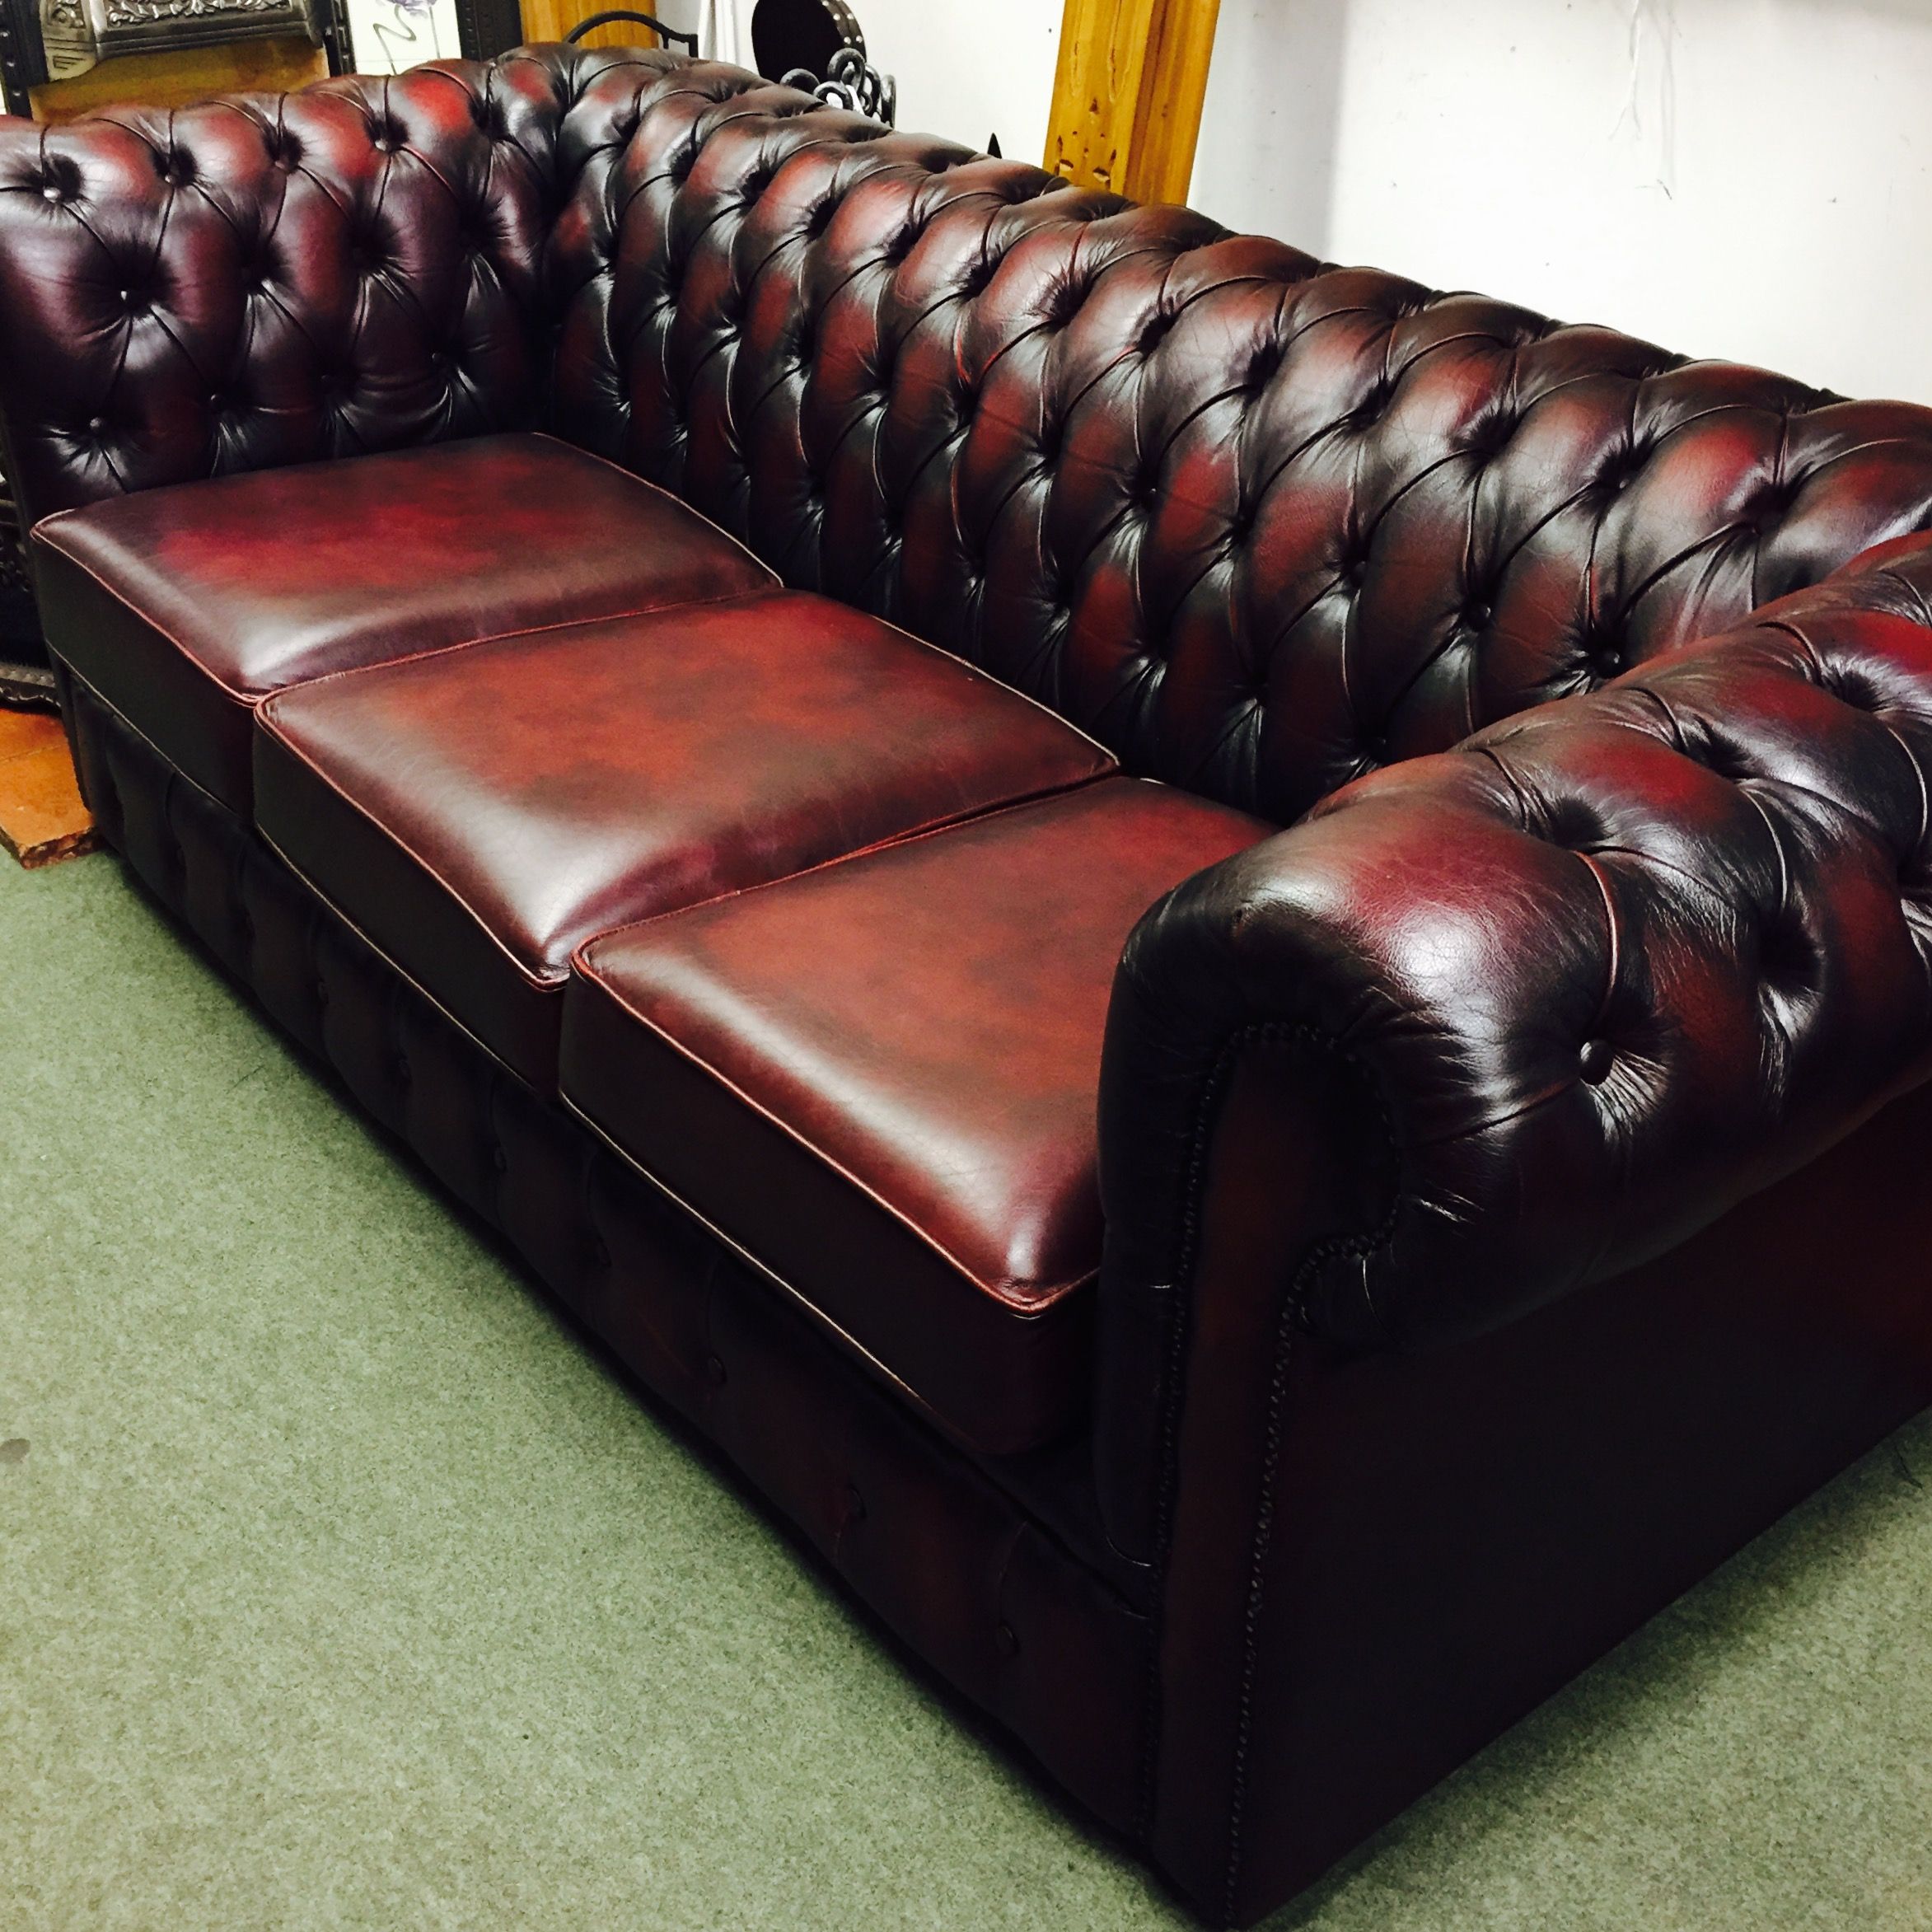 The Dog House Antiques – Pair Of Chesterfield Style Sofa’s Intended For Chesterfield Sofas (Gallery 12 of 21)